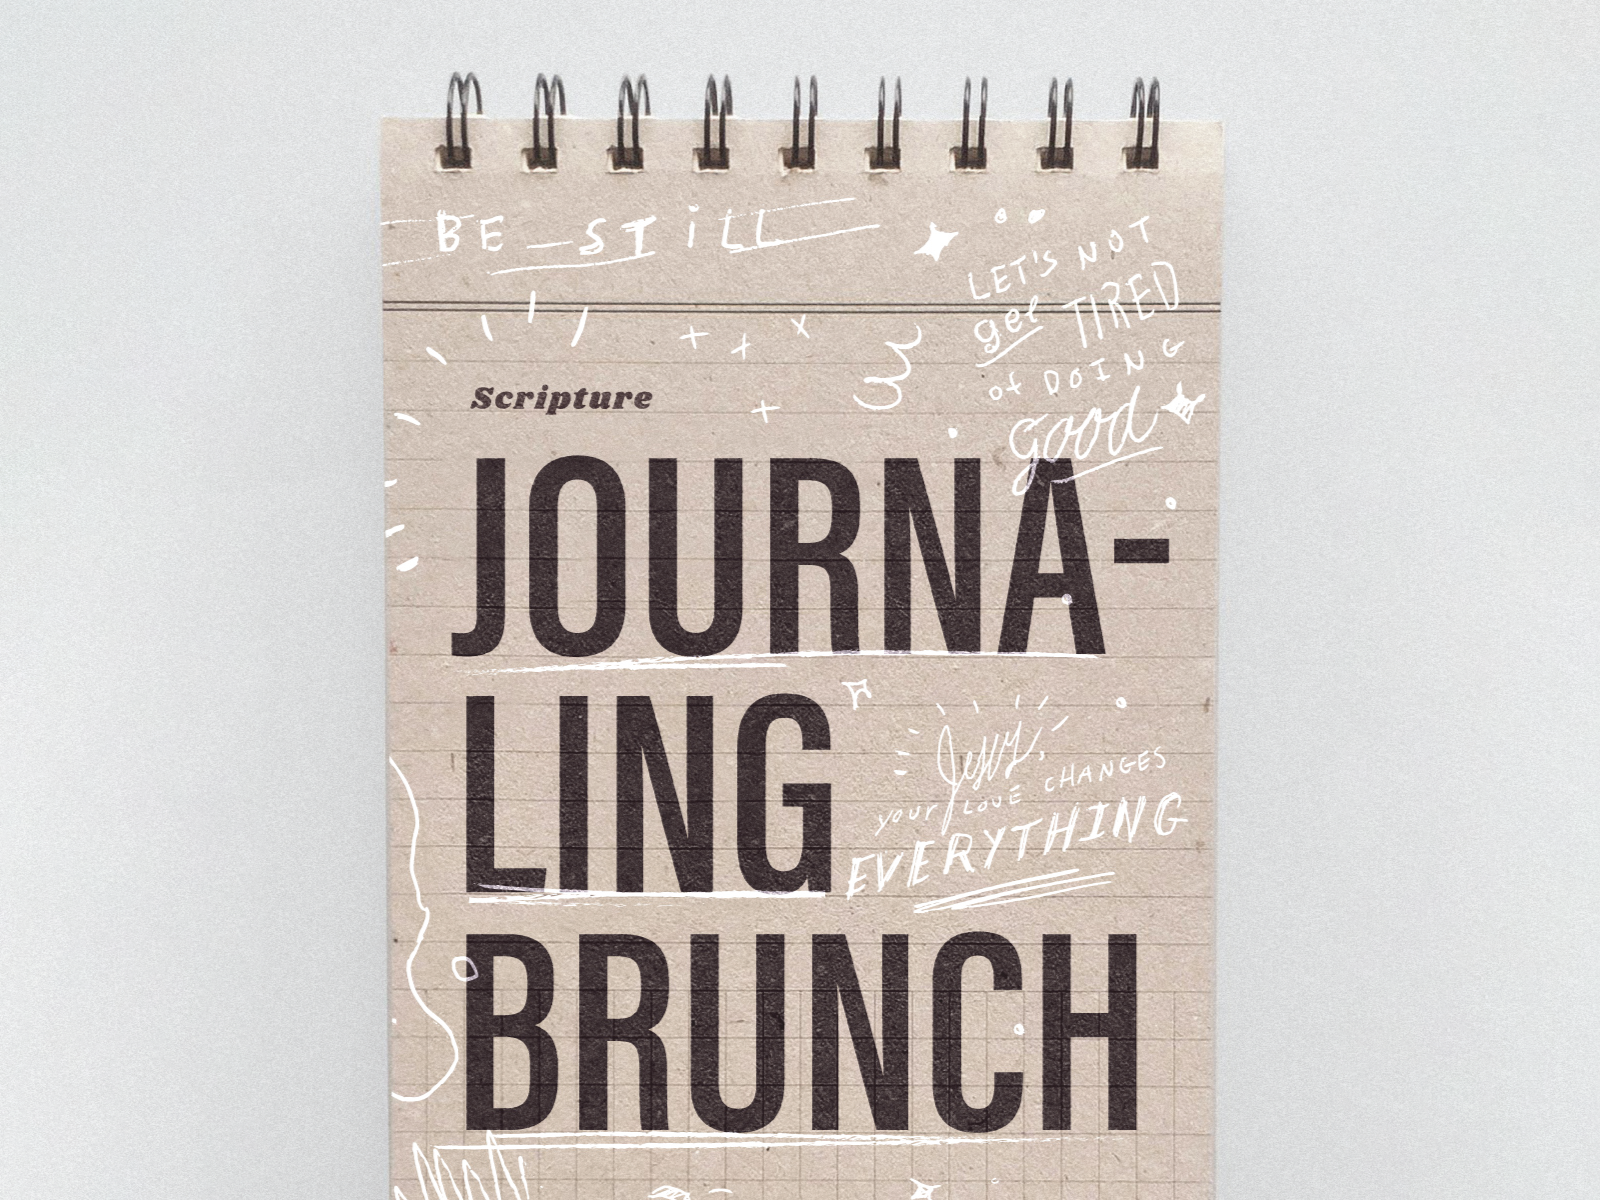 Scripture Journaling Brunch layout church student ministry students girls brunch invitation invite bible sketches messy typography journaling art event card